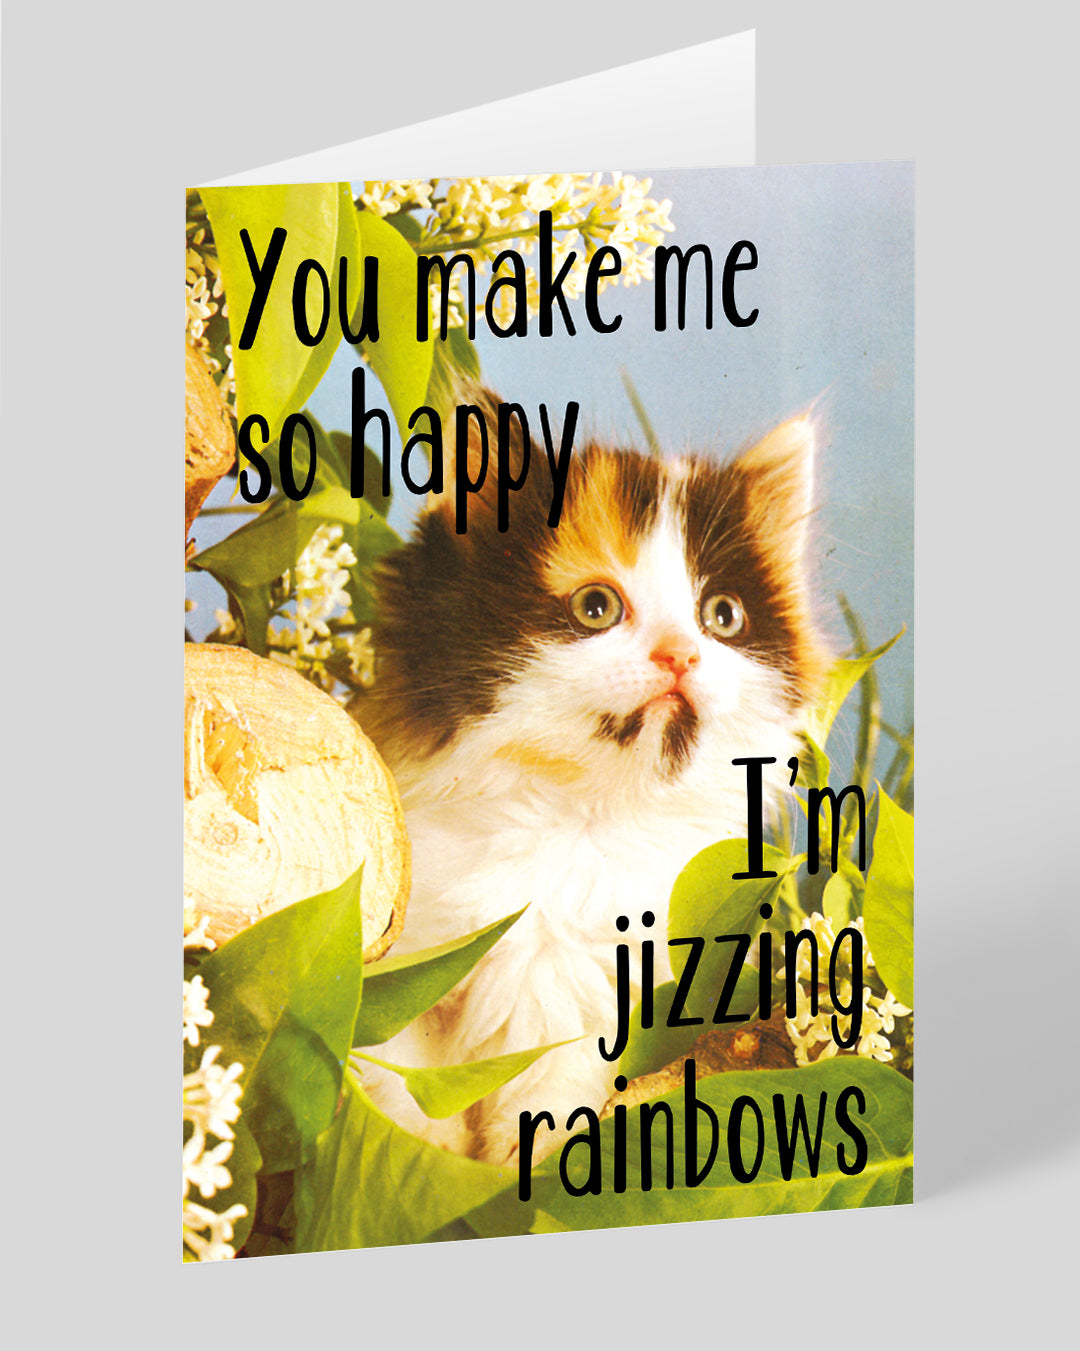 Valentine’s Day | Rude Valentines Card For Her or Him | Personalised Jizzing Rainbows Greeting Card | Ohh Deer Unique Valentine’s Card | Made In The UK, Eco-Friendly Materials, Plastic Free Packaging